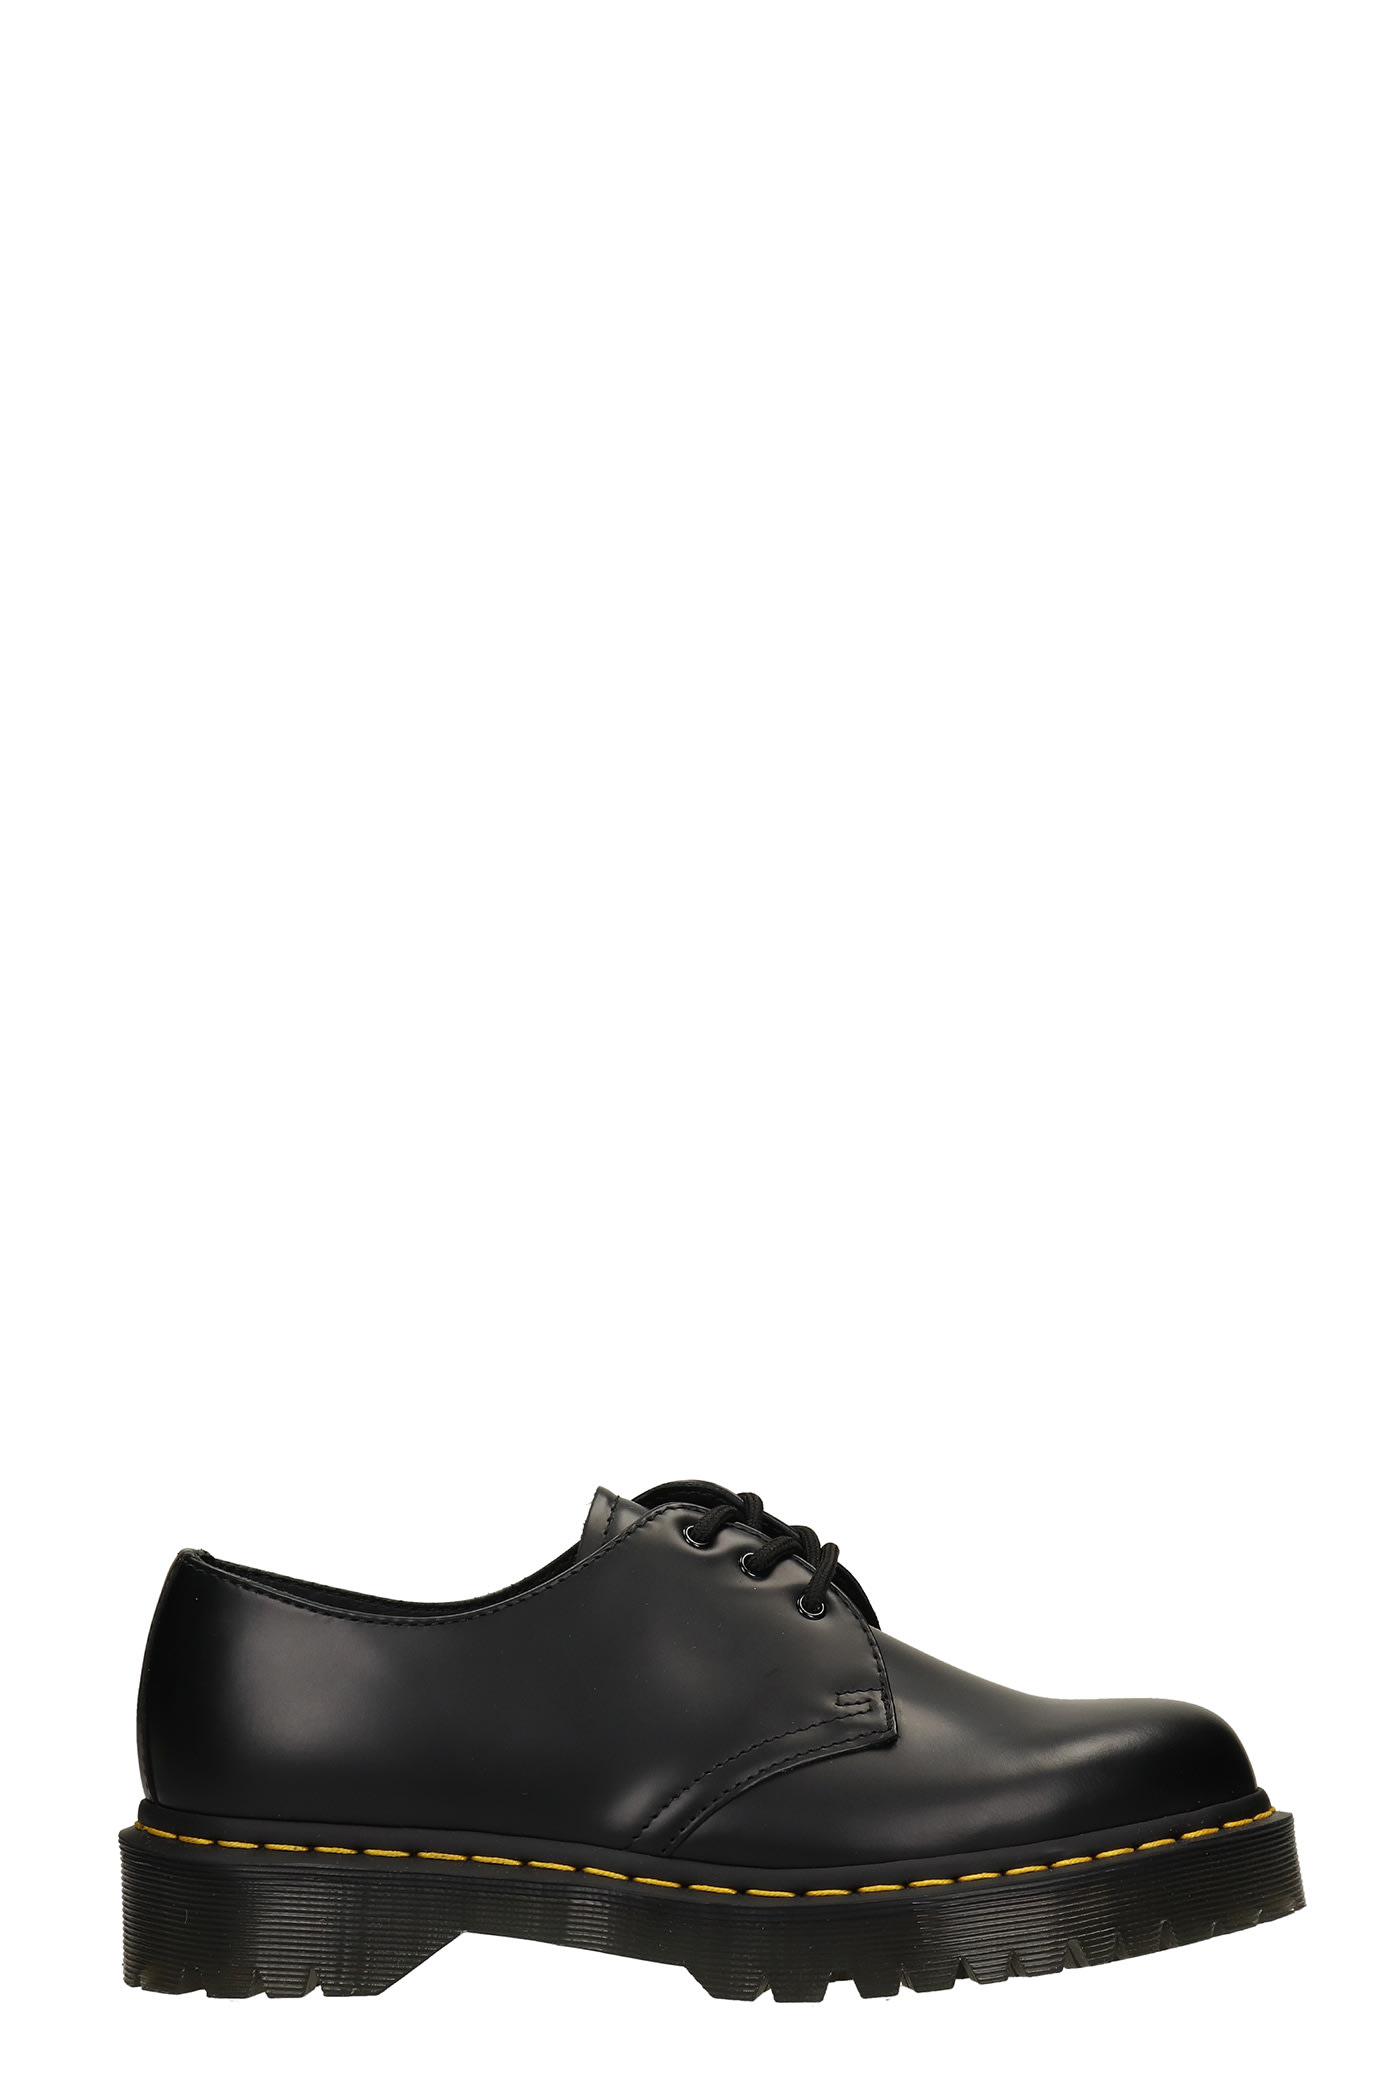 Dr. Martens 1461 Bex Lace Up Shoes In Black Leather